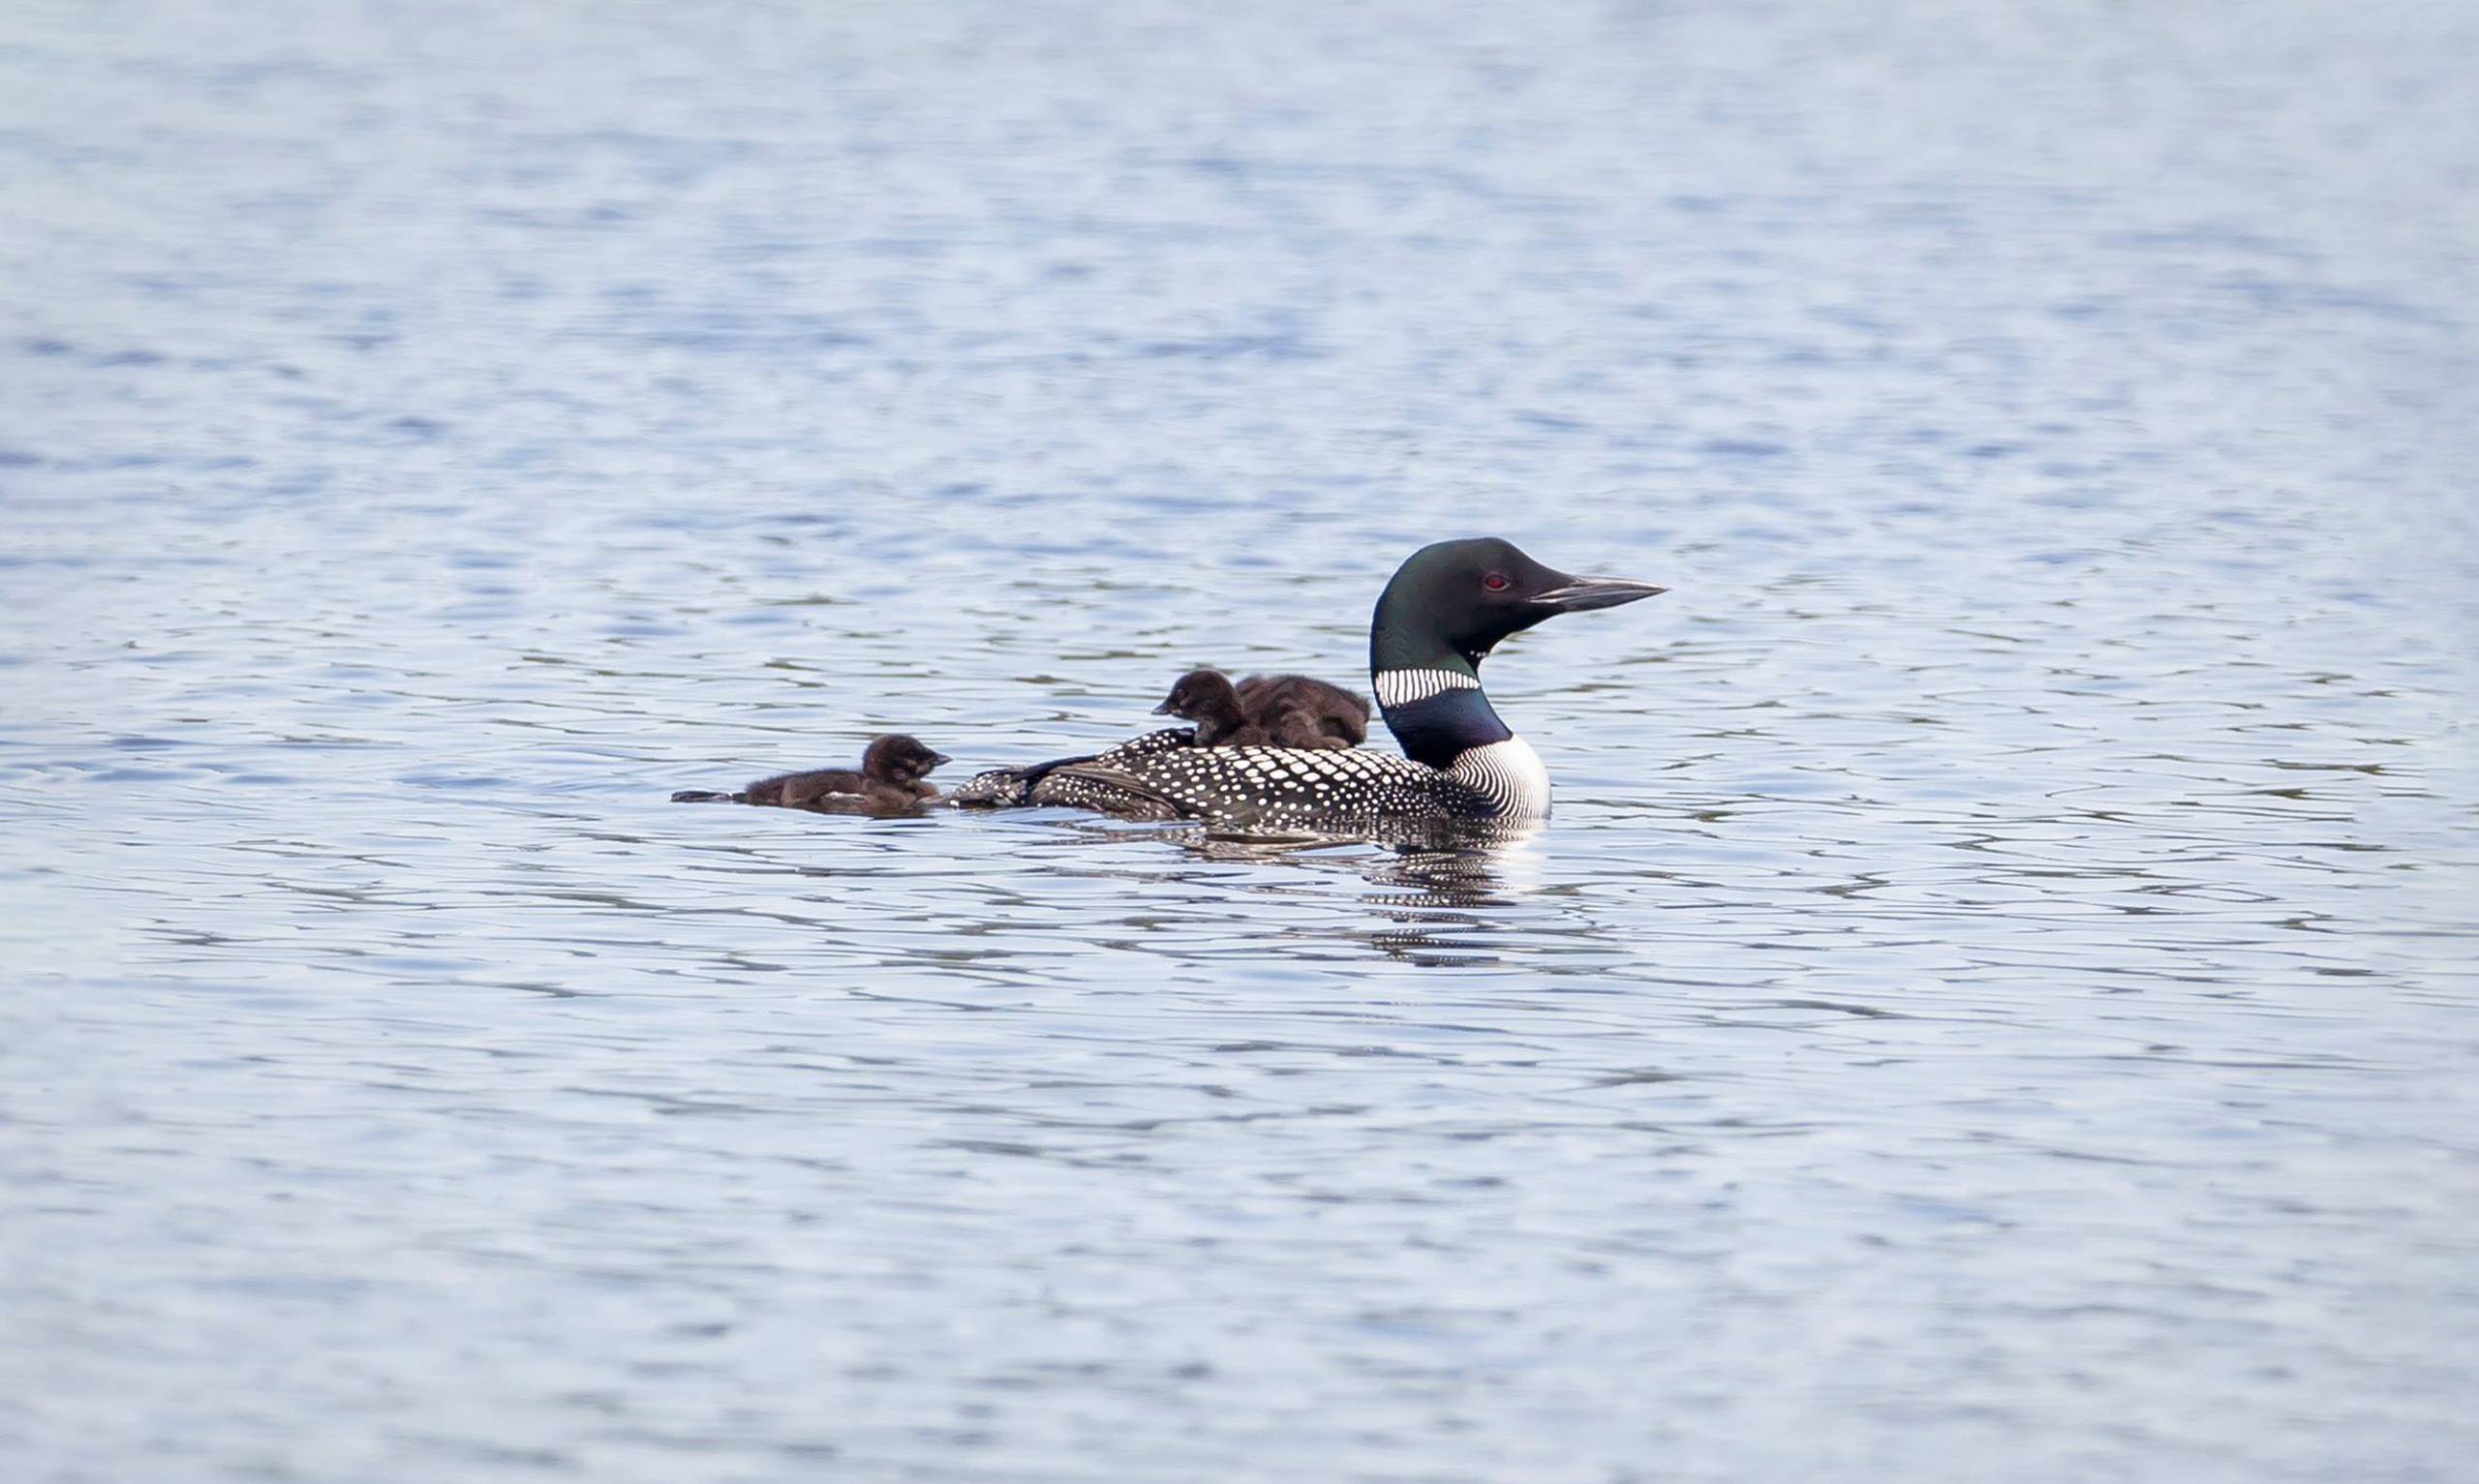 The common loon known as ABJ on the water with two chicks